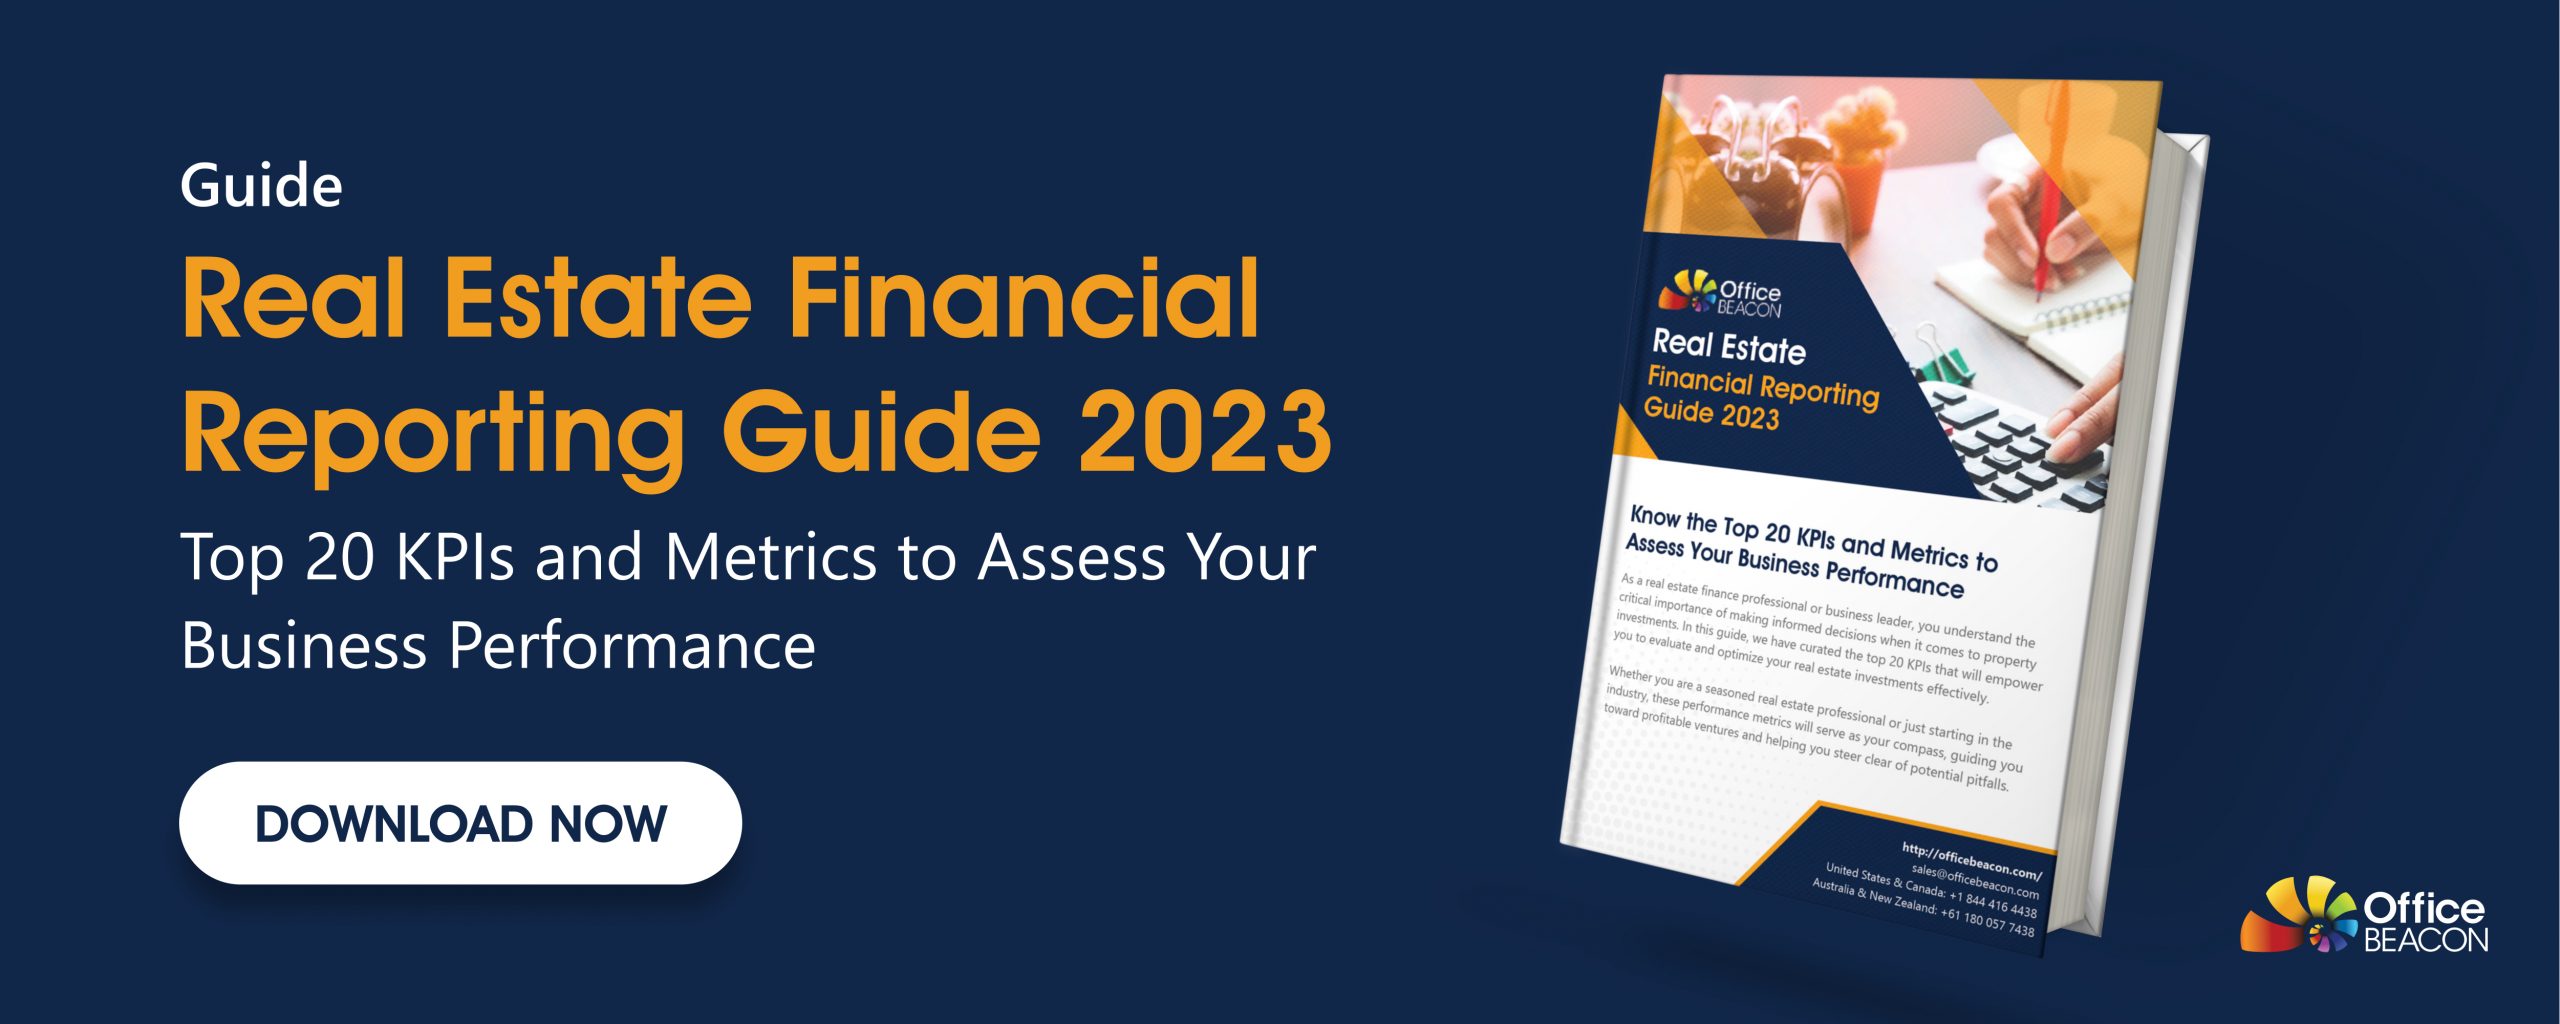 A guide for real estate finance professionals available to download for free